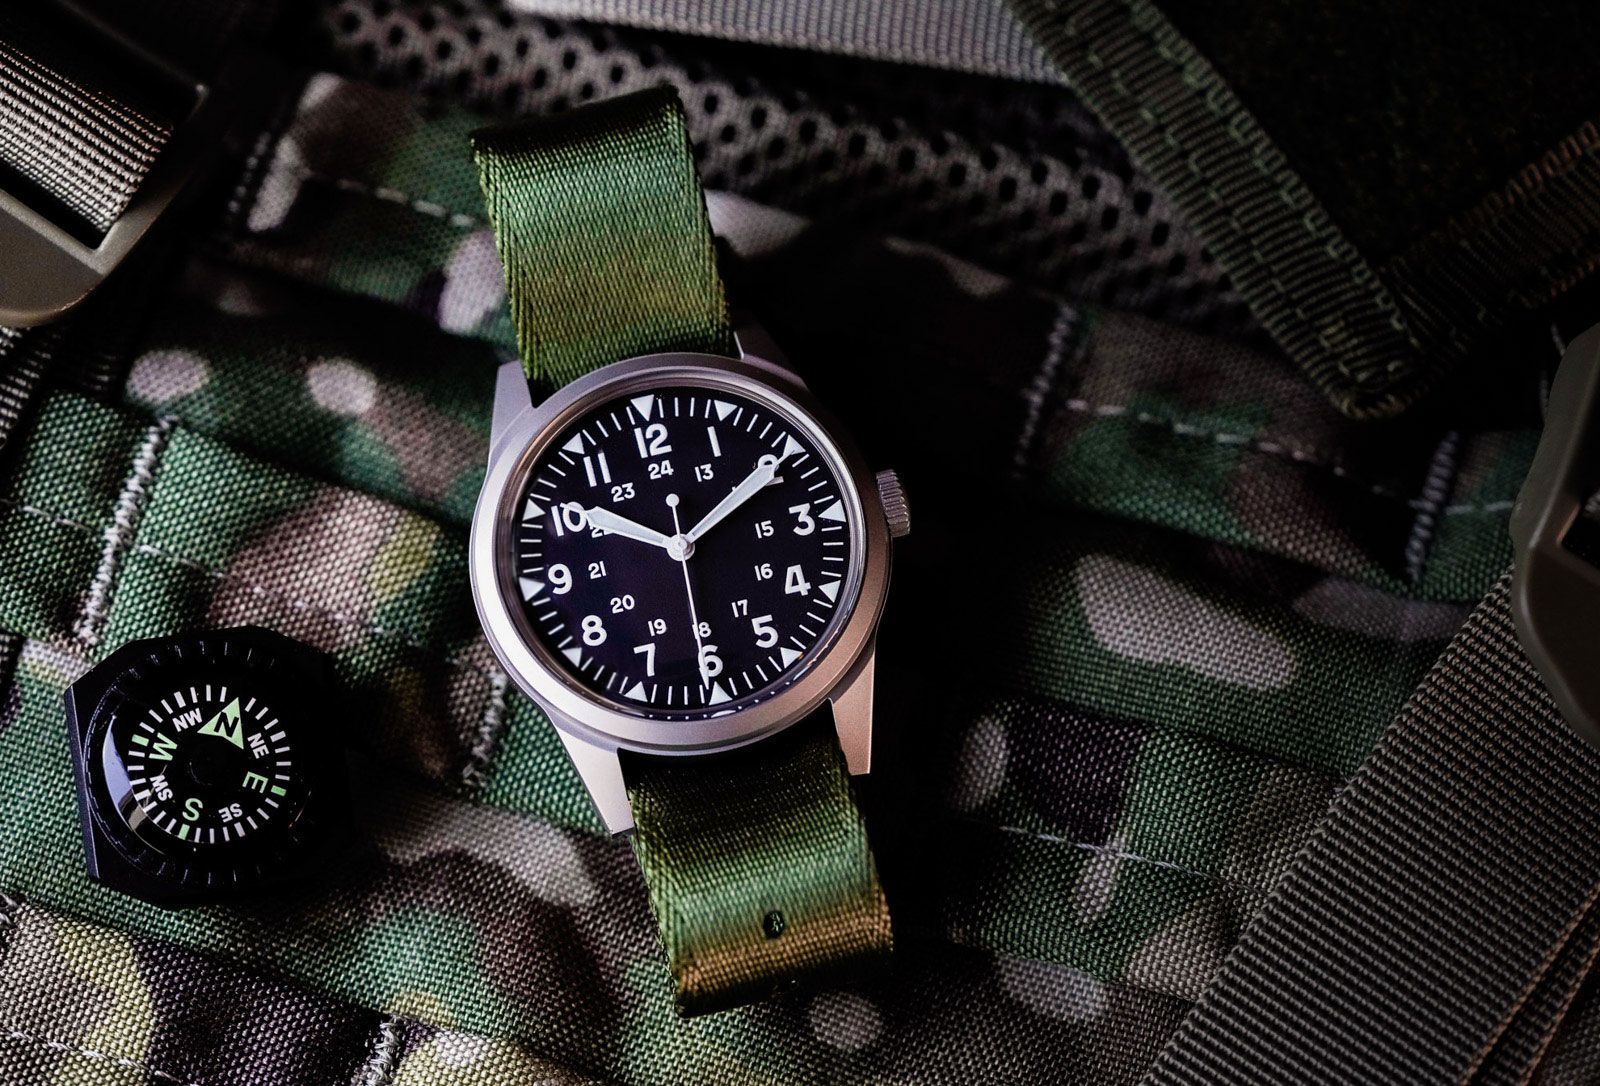 The Ultimate Military Field Watch Has Returned